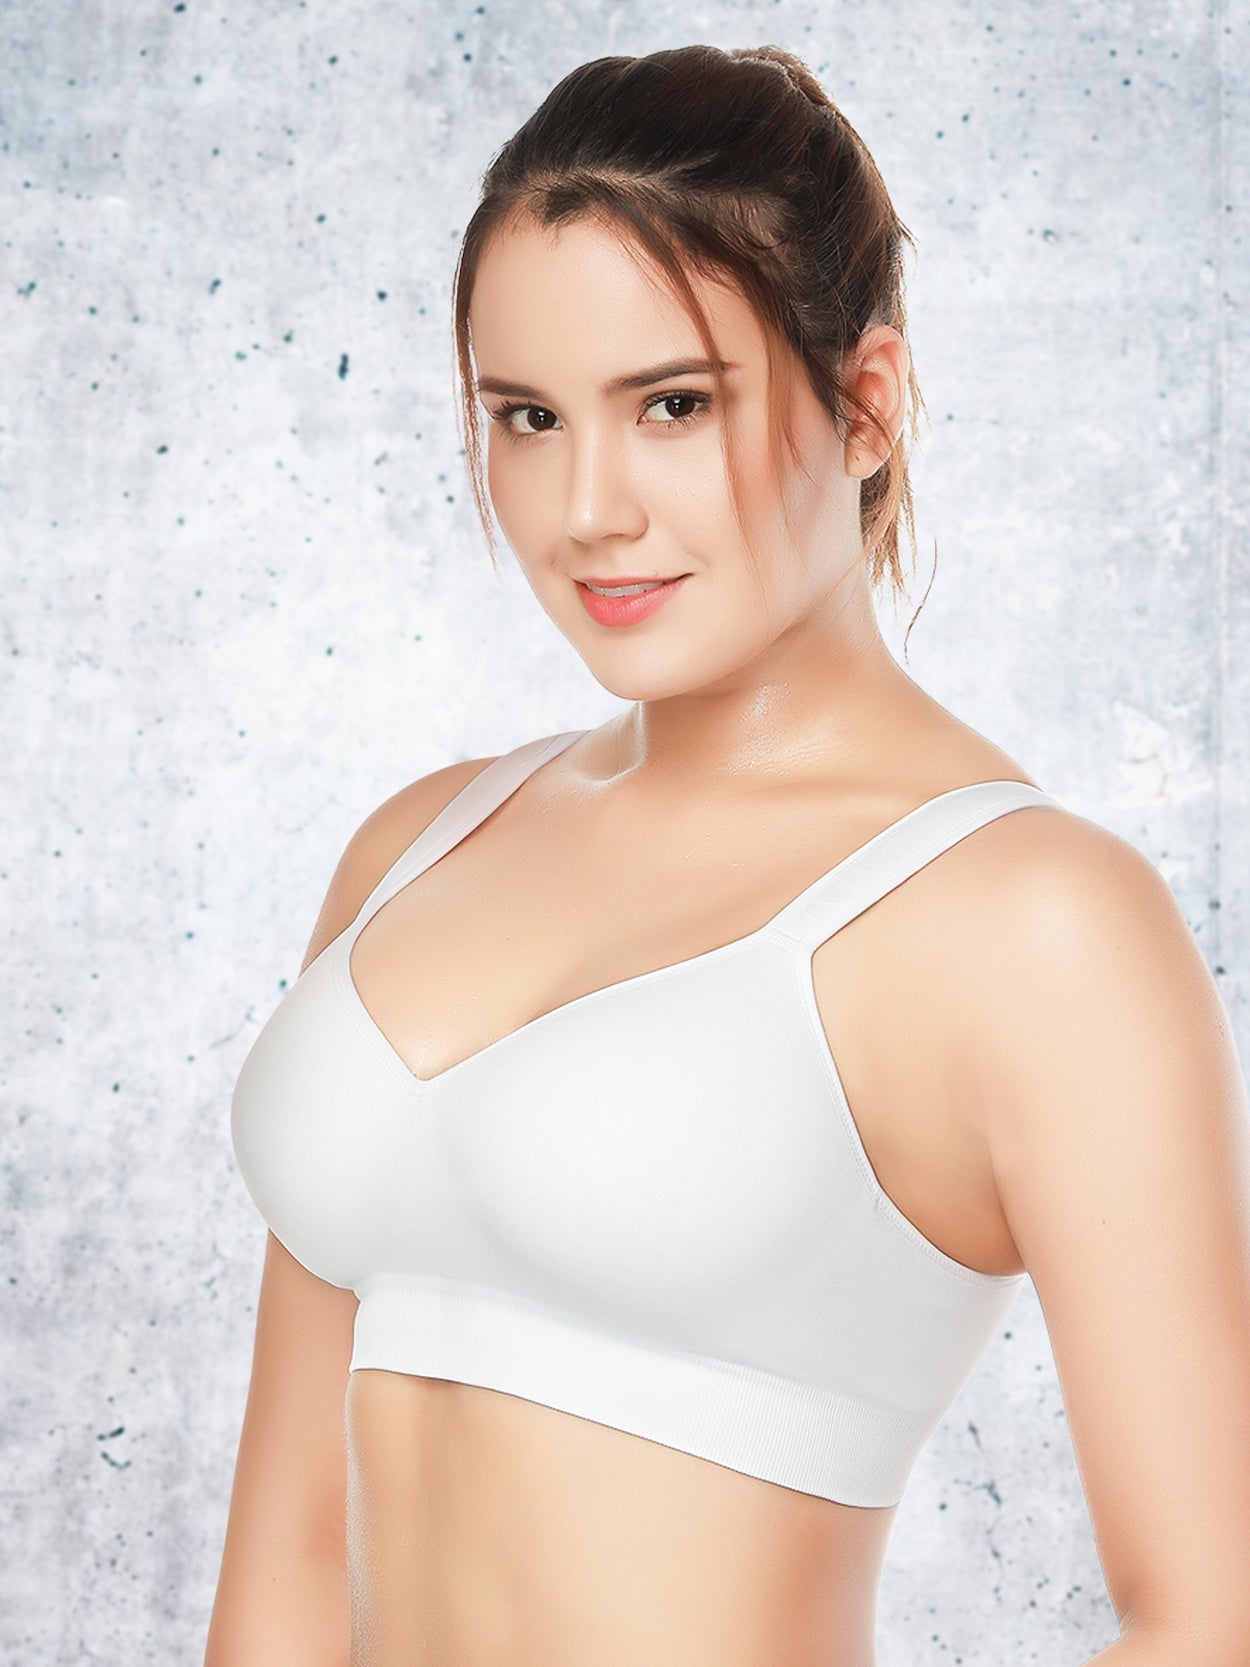 Pin on clothes yoga sport bras